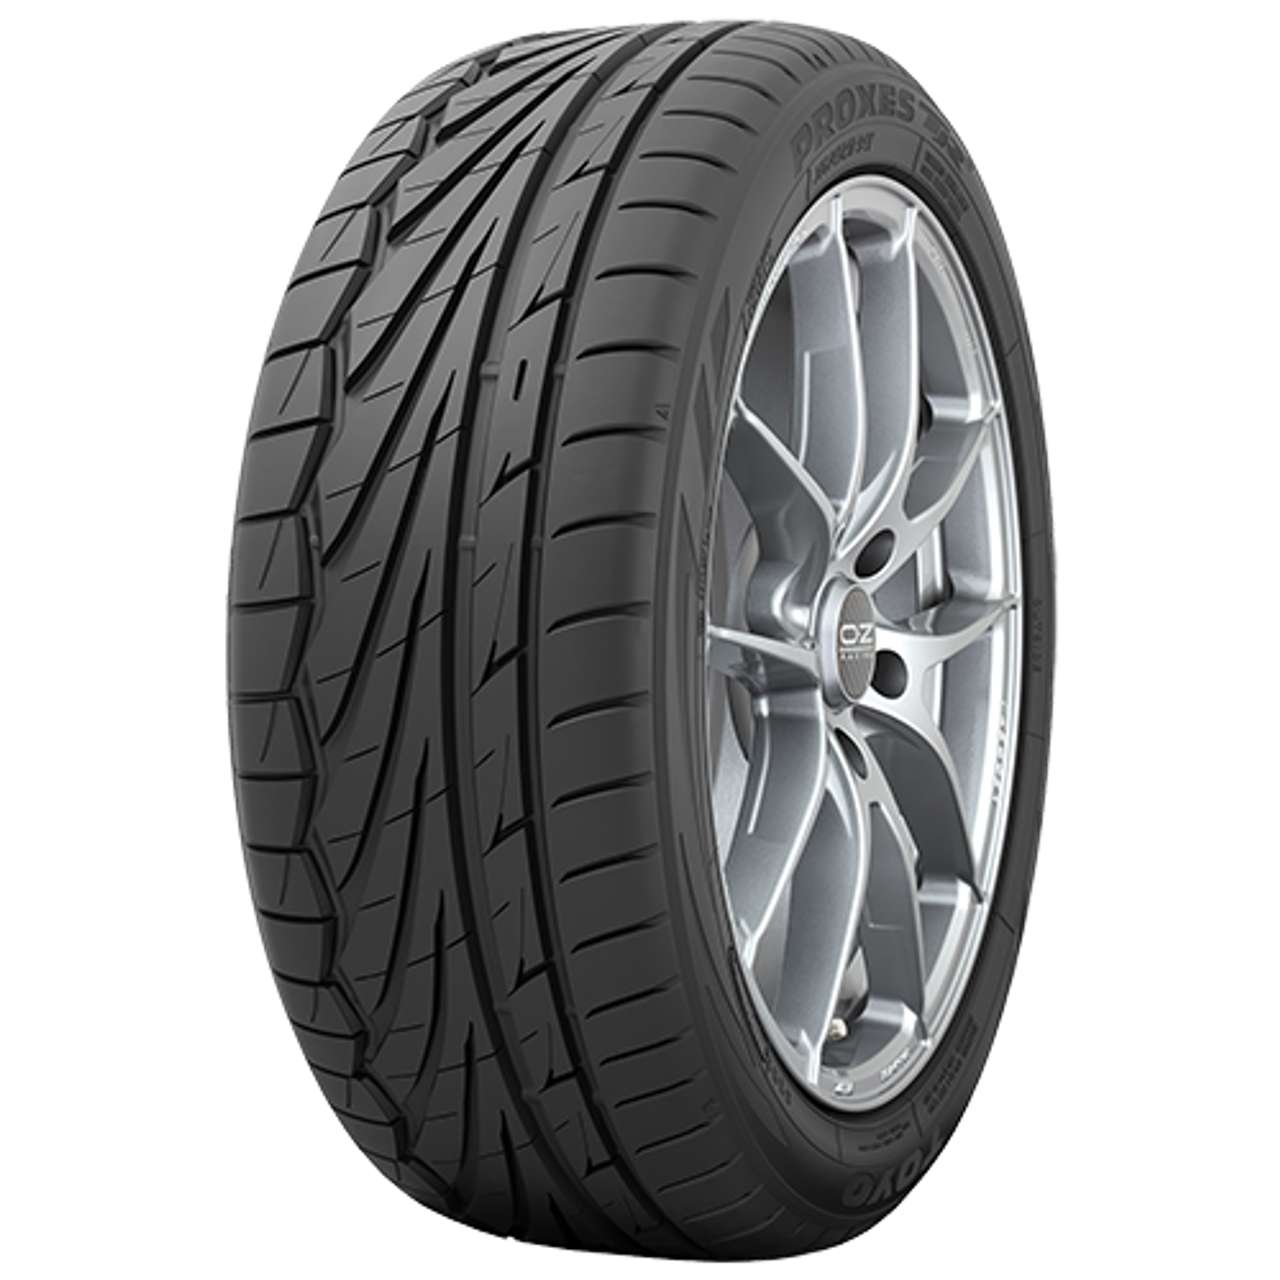 TOYO PROXES TR1 195/50R16 84V BSW